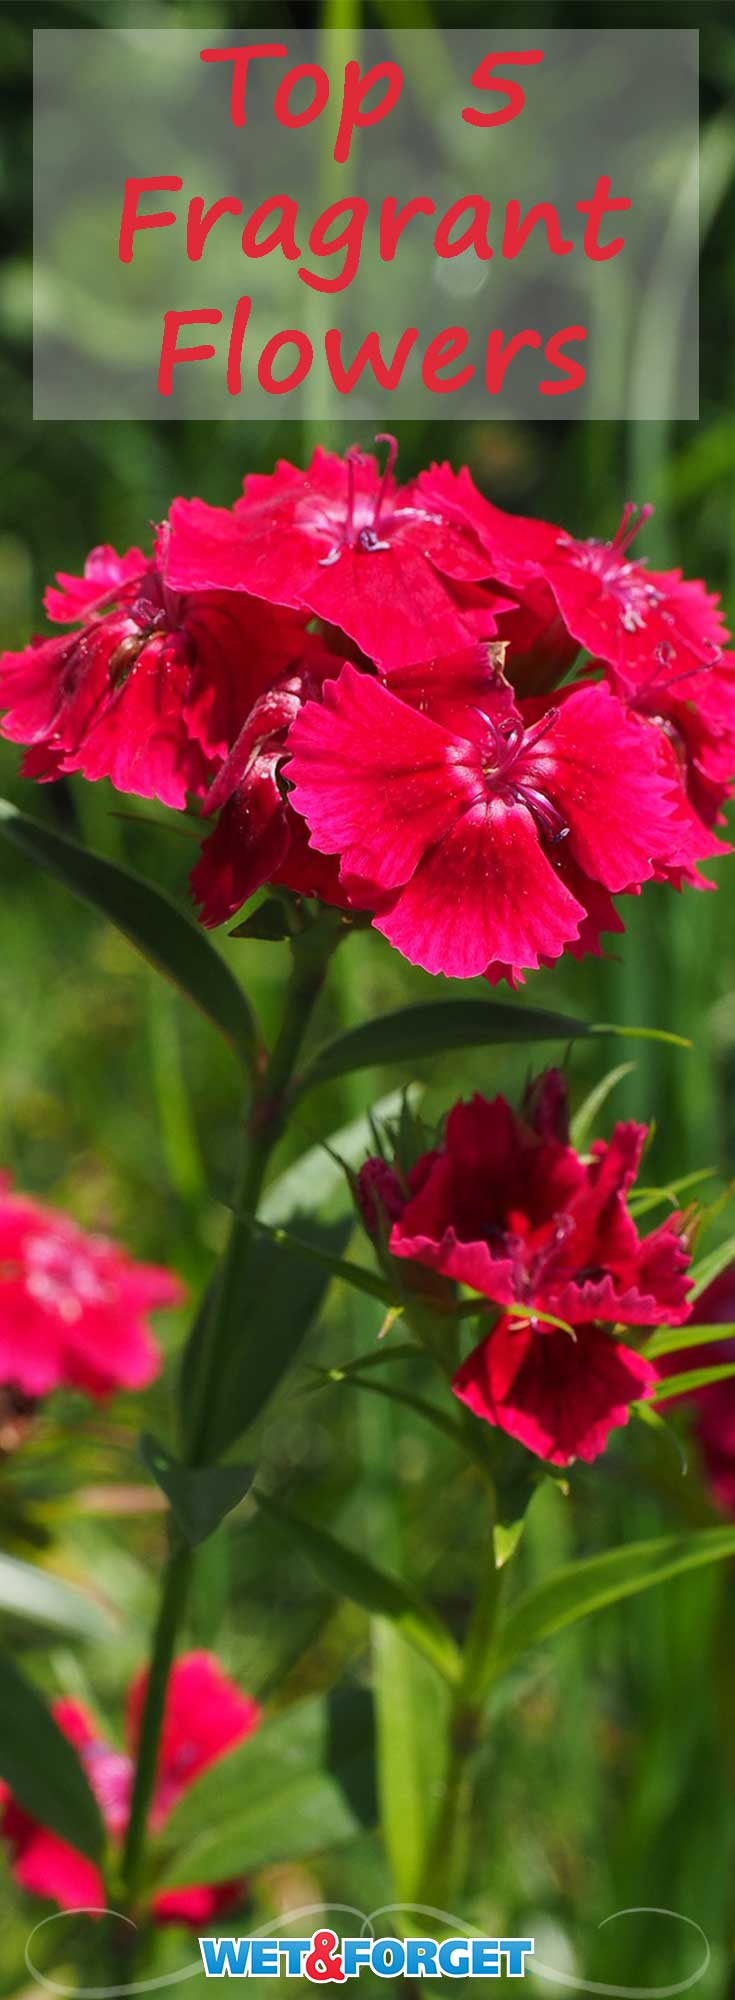 Brighten your garden with these fragrant flowers! These flowers will not only pamper your senses, but also add a wide variety of colors to your flower patch.